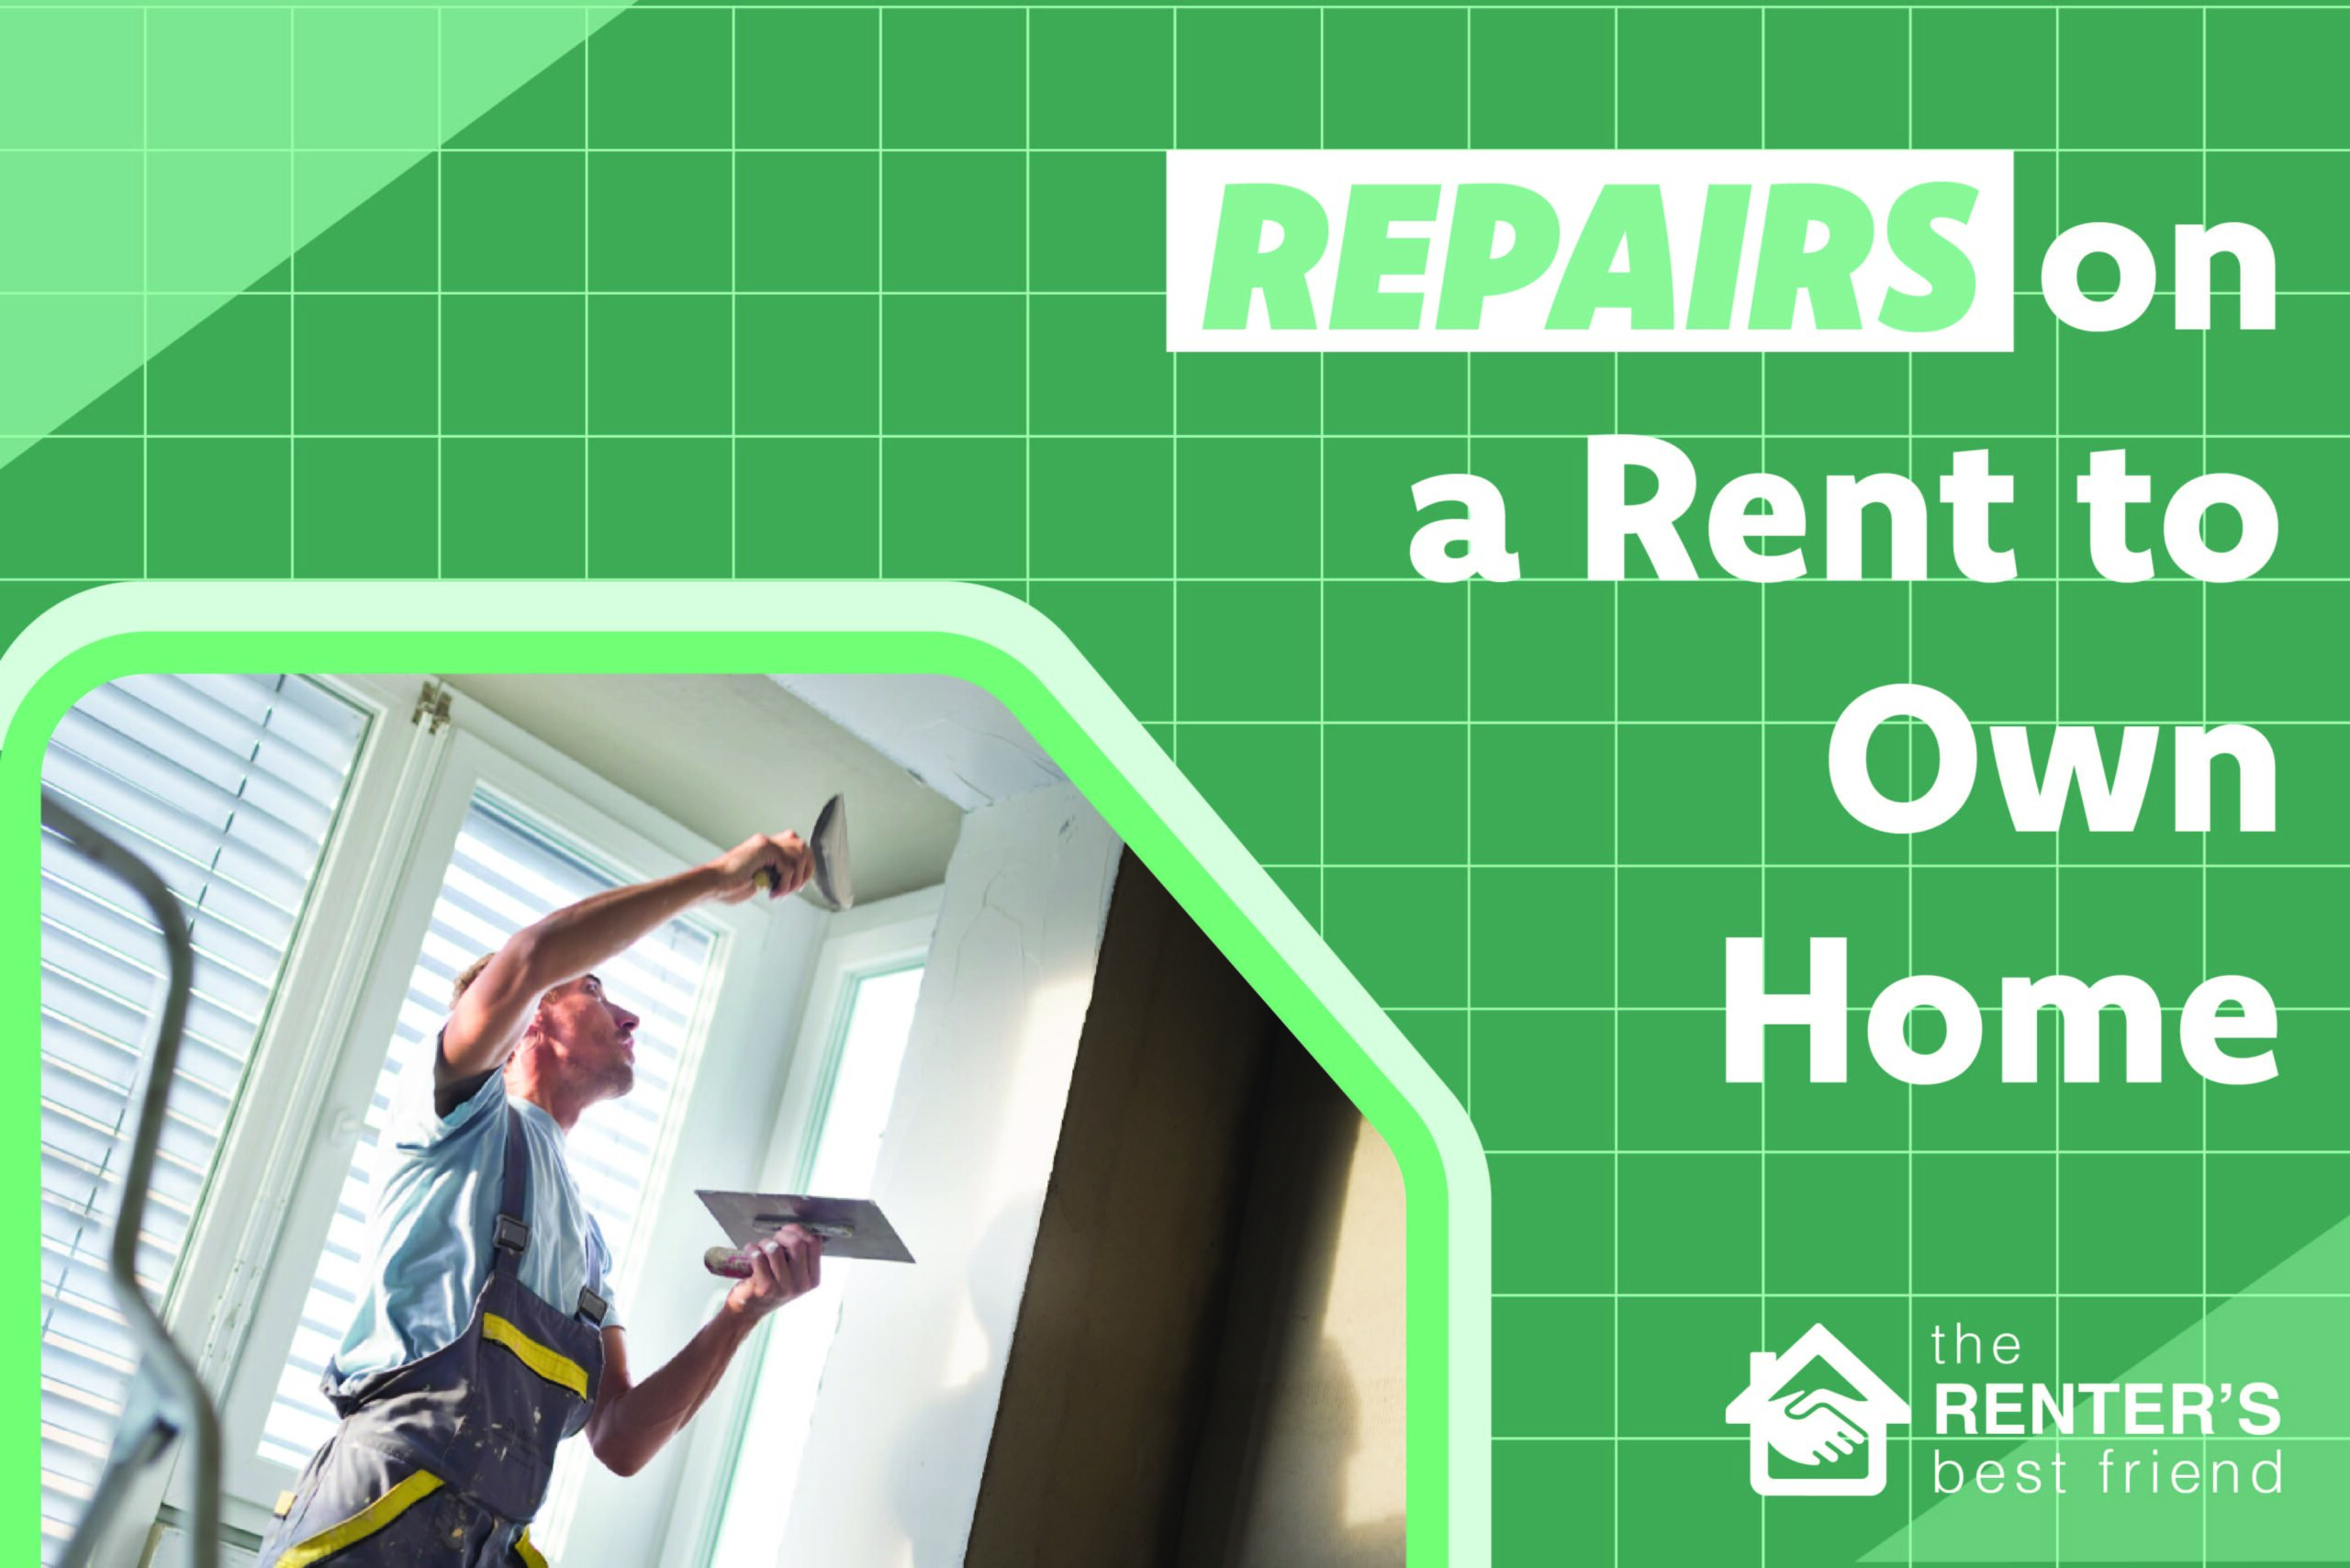 Who Handles Repairs on a Rent to Own (RTO) Home?